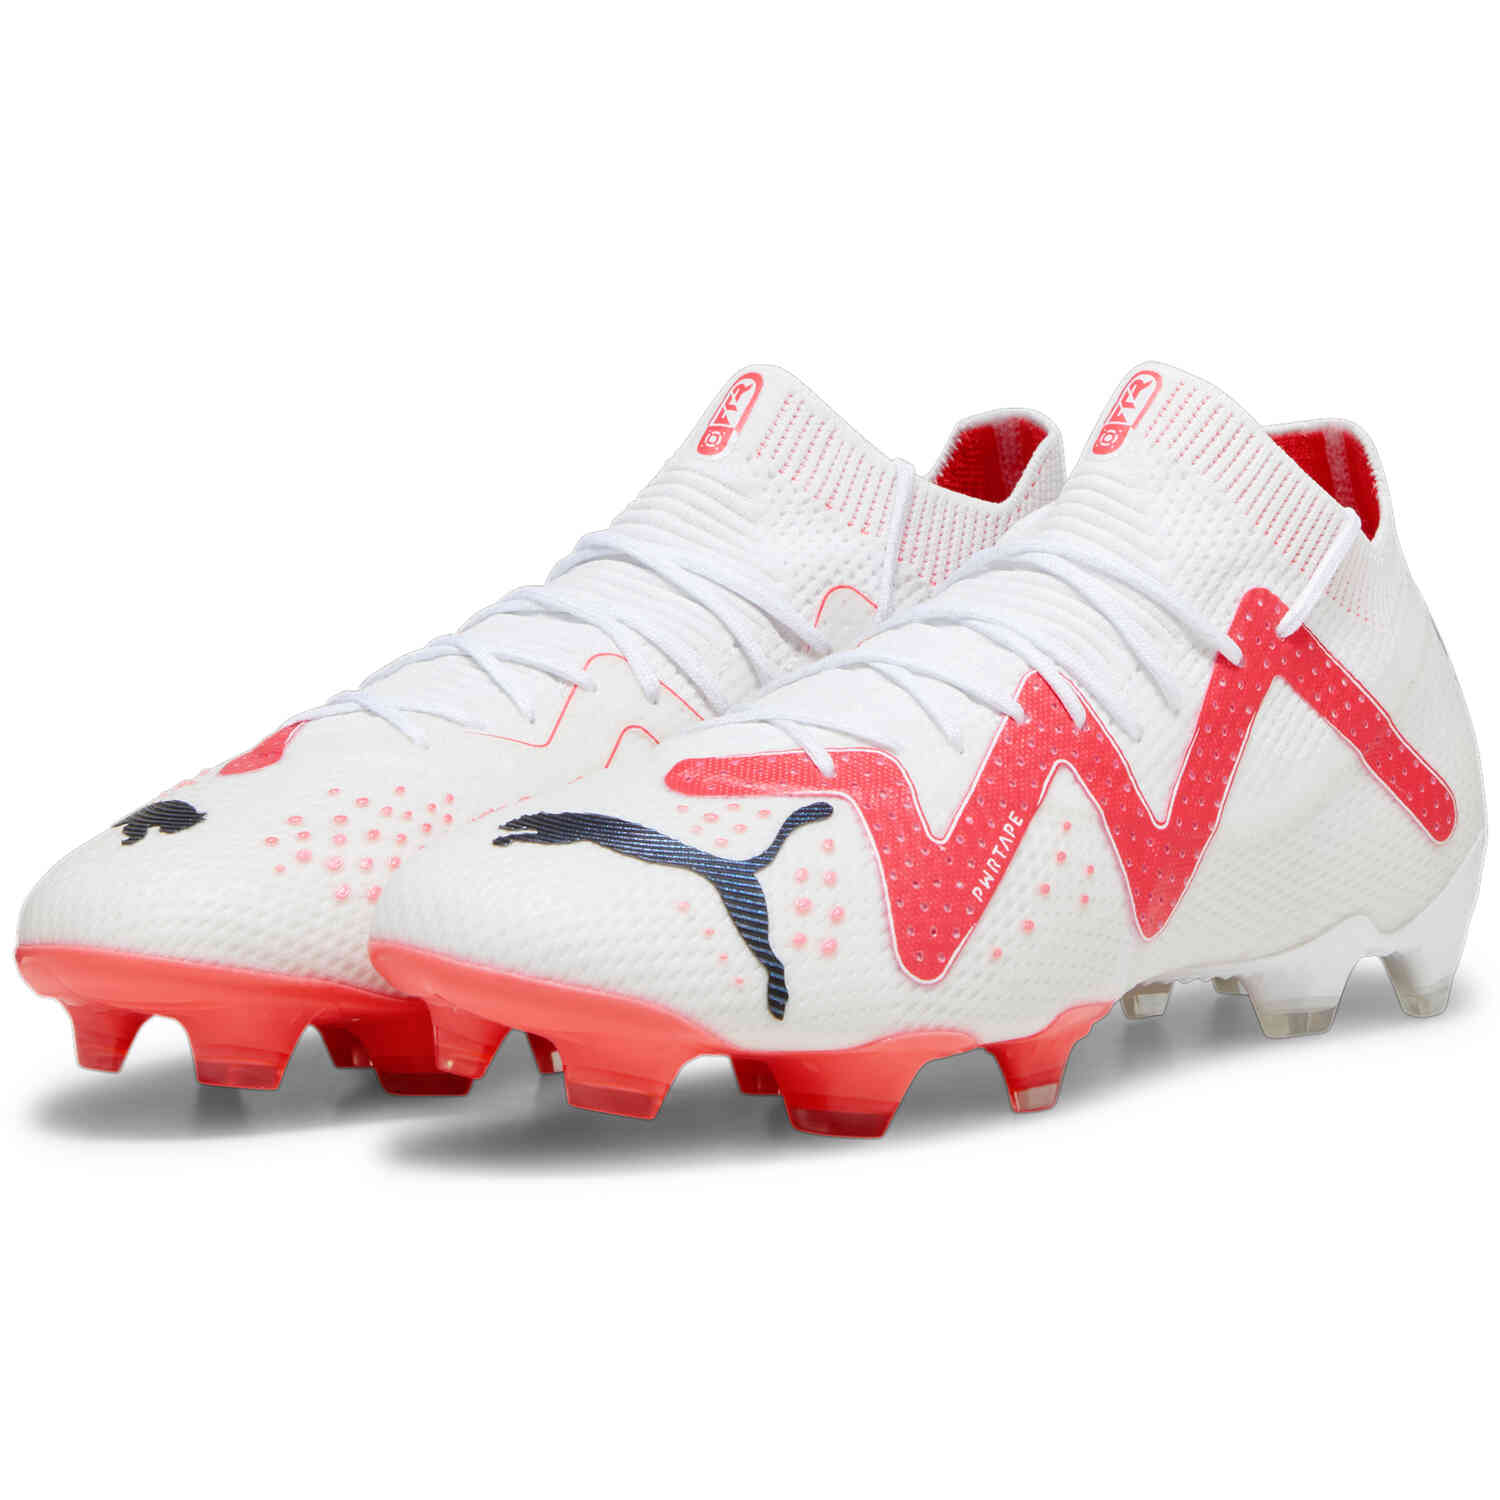 PUMA FUTURE ULTIMATE FG/AG Soccer Master White, - & Soccer Orchid - Fire Black Cleats